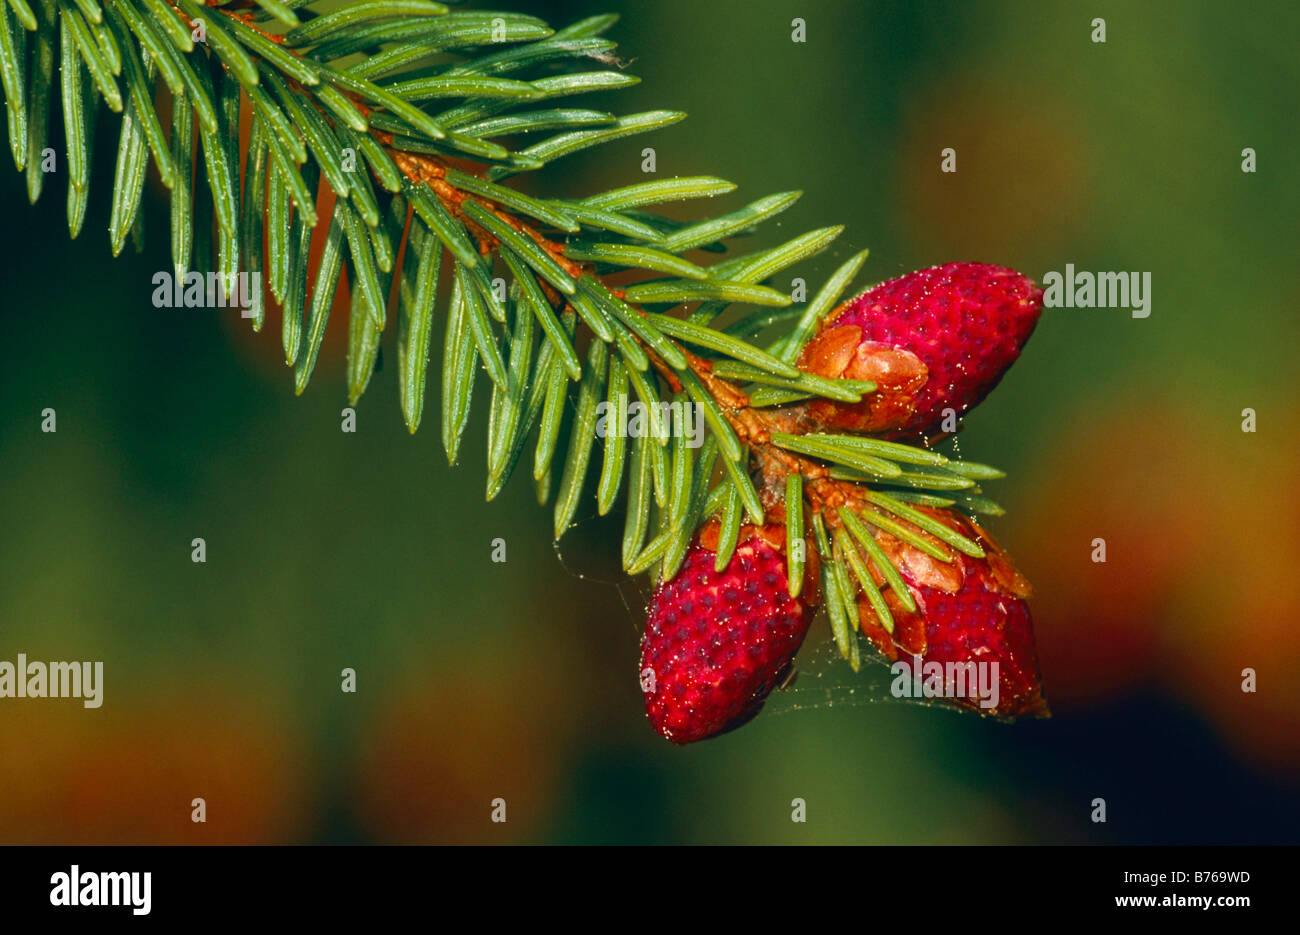 spruce branch bloom detail close up picea abies picea verrucosa background Stock Photo